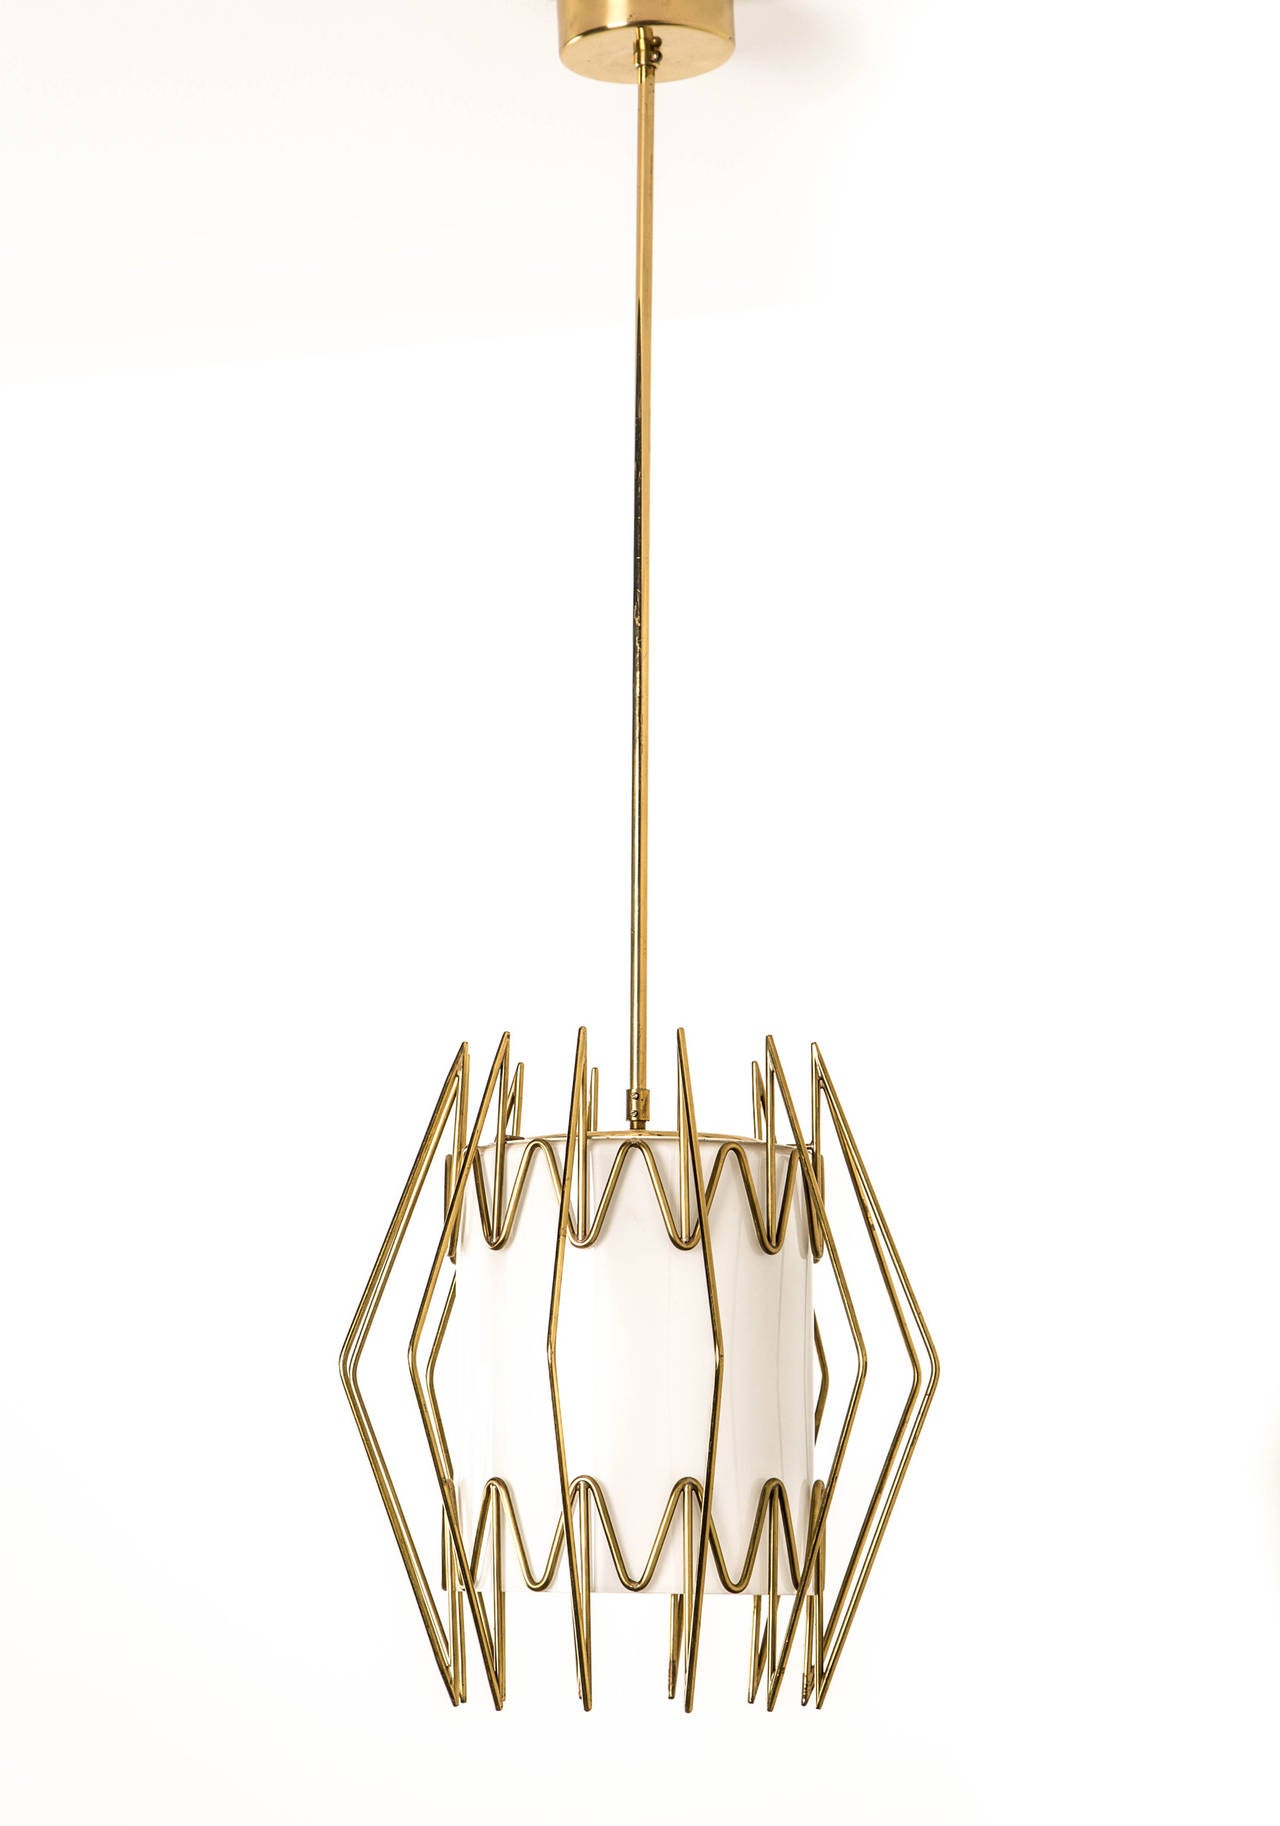 Paavo Tynell.

Mikelli Borough lamp.

Taito,
Finland, circa 1940s.
Brass, painted metal, opaline glass.
Dimension: 40 H x 12 D inches.

Rare custom designed light by Paavo Tynell for the Mikkeli Parish's Borough hall.